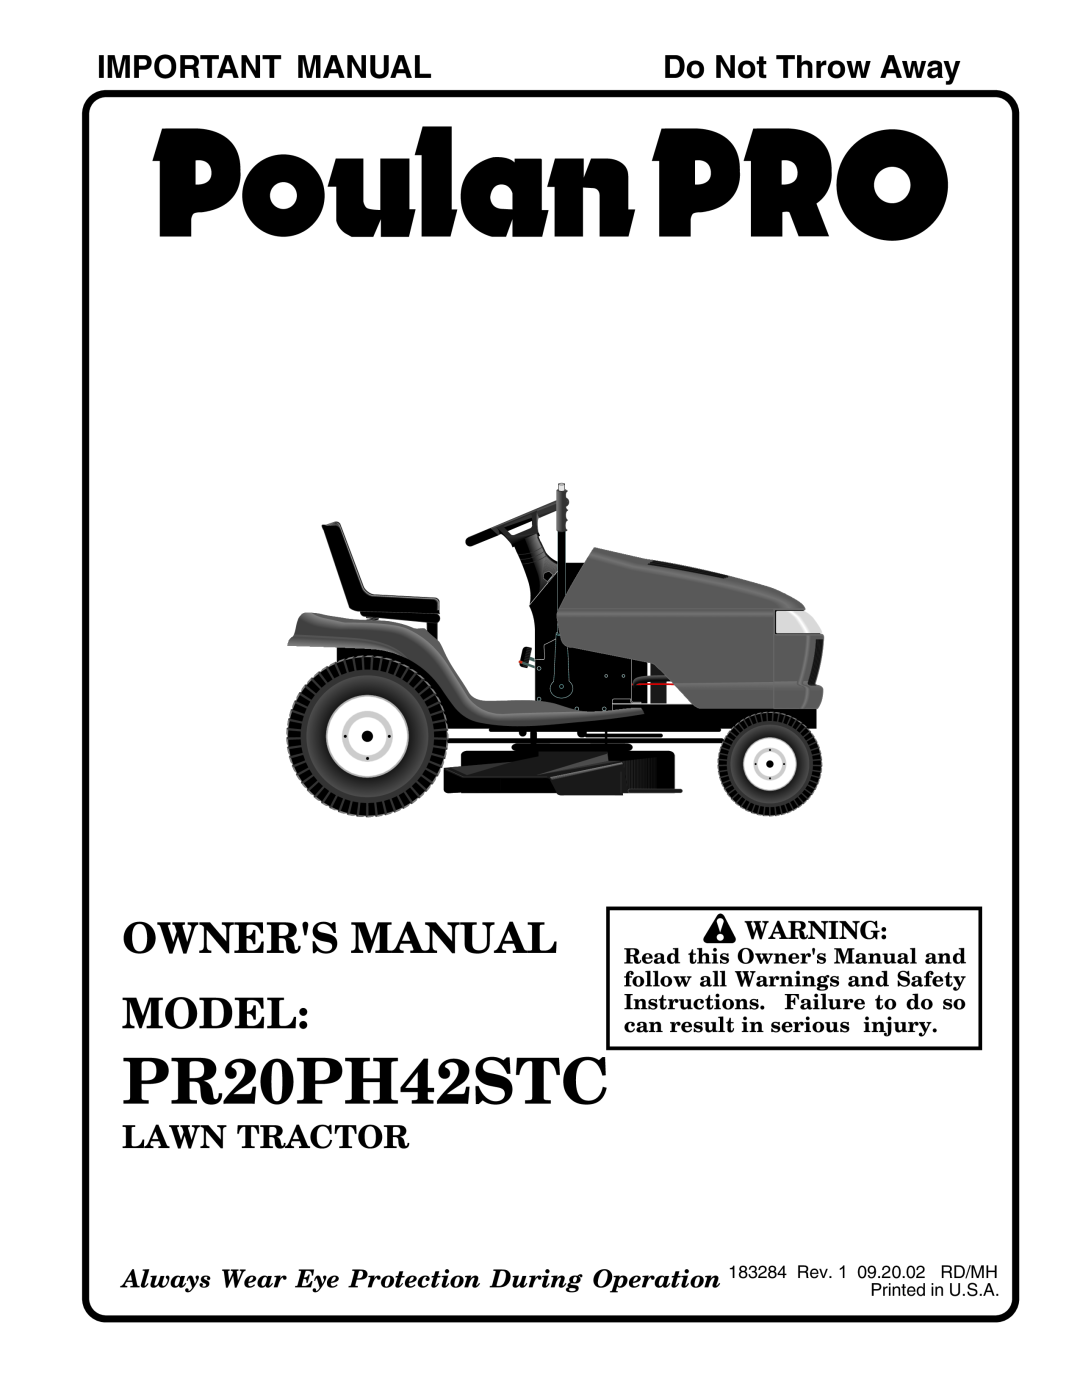 Poulan 183284 owner manual Owners Manual Model, Important Manual, Do Not Throw Away, PR20PH42STC, Lawn Tractor 